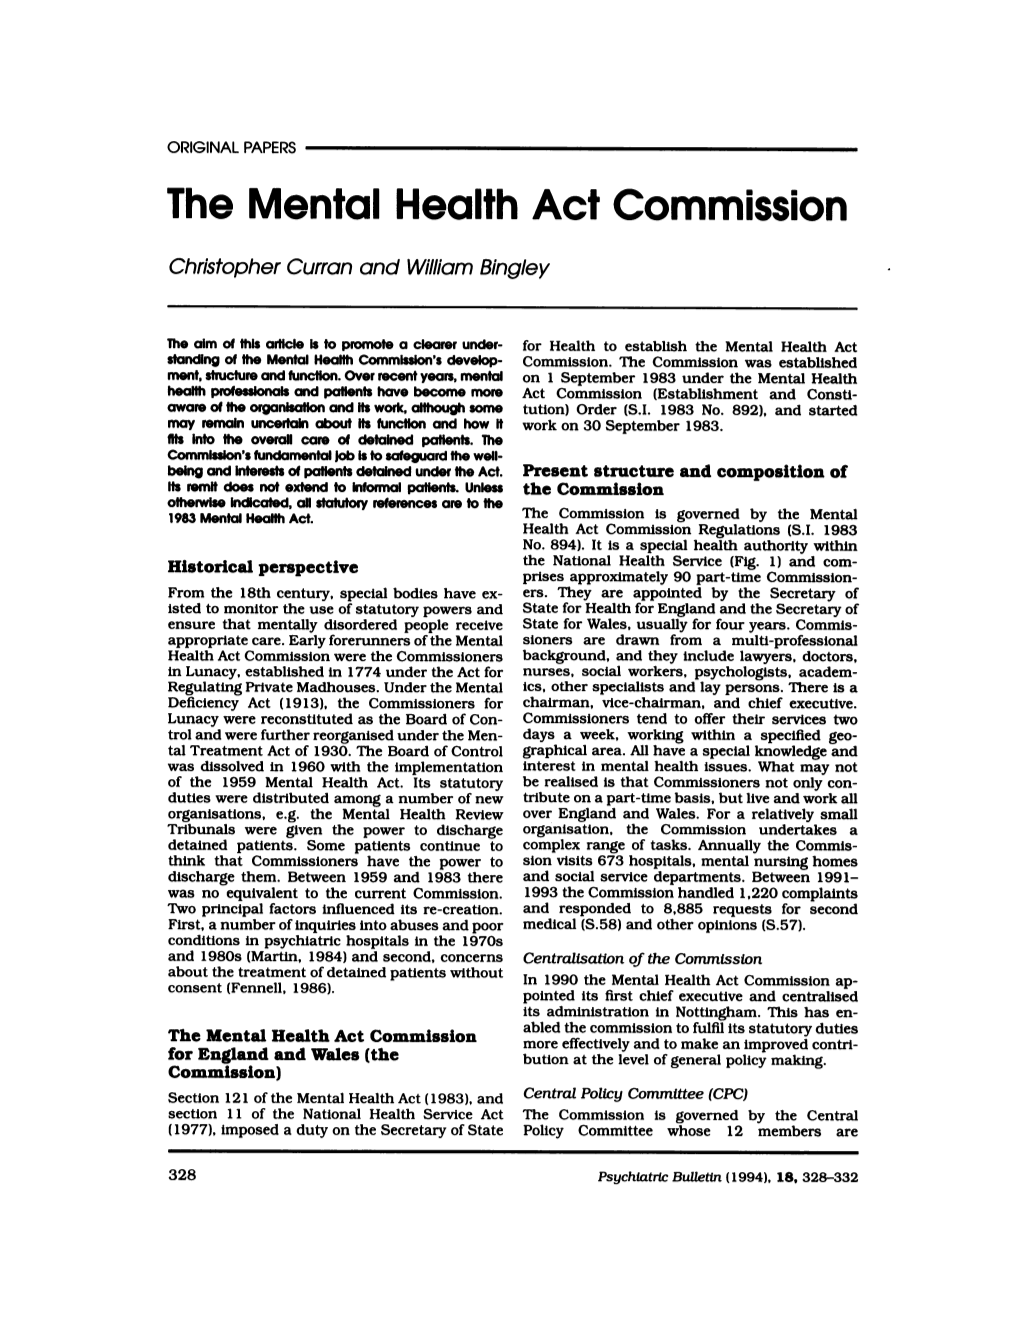 The Mental Health Act Commission